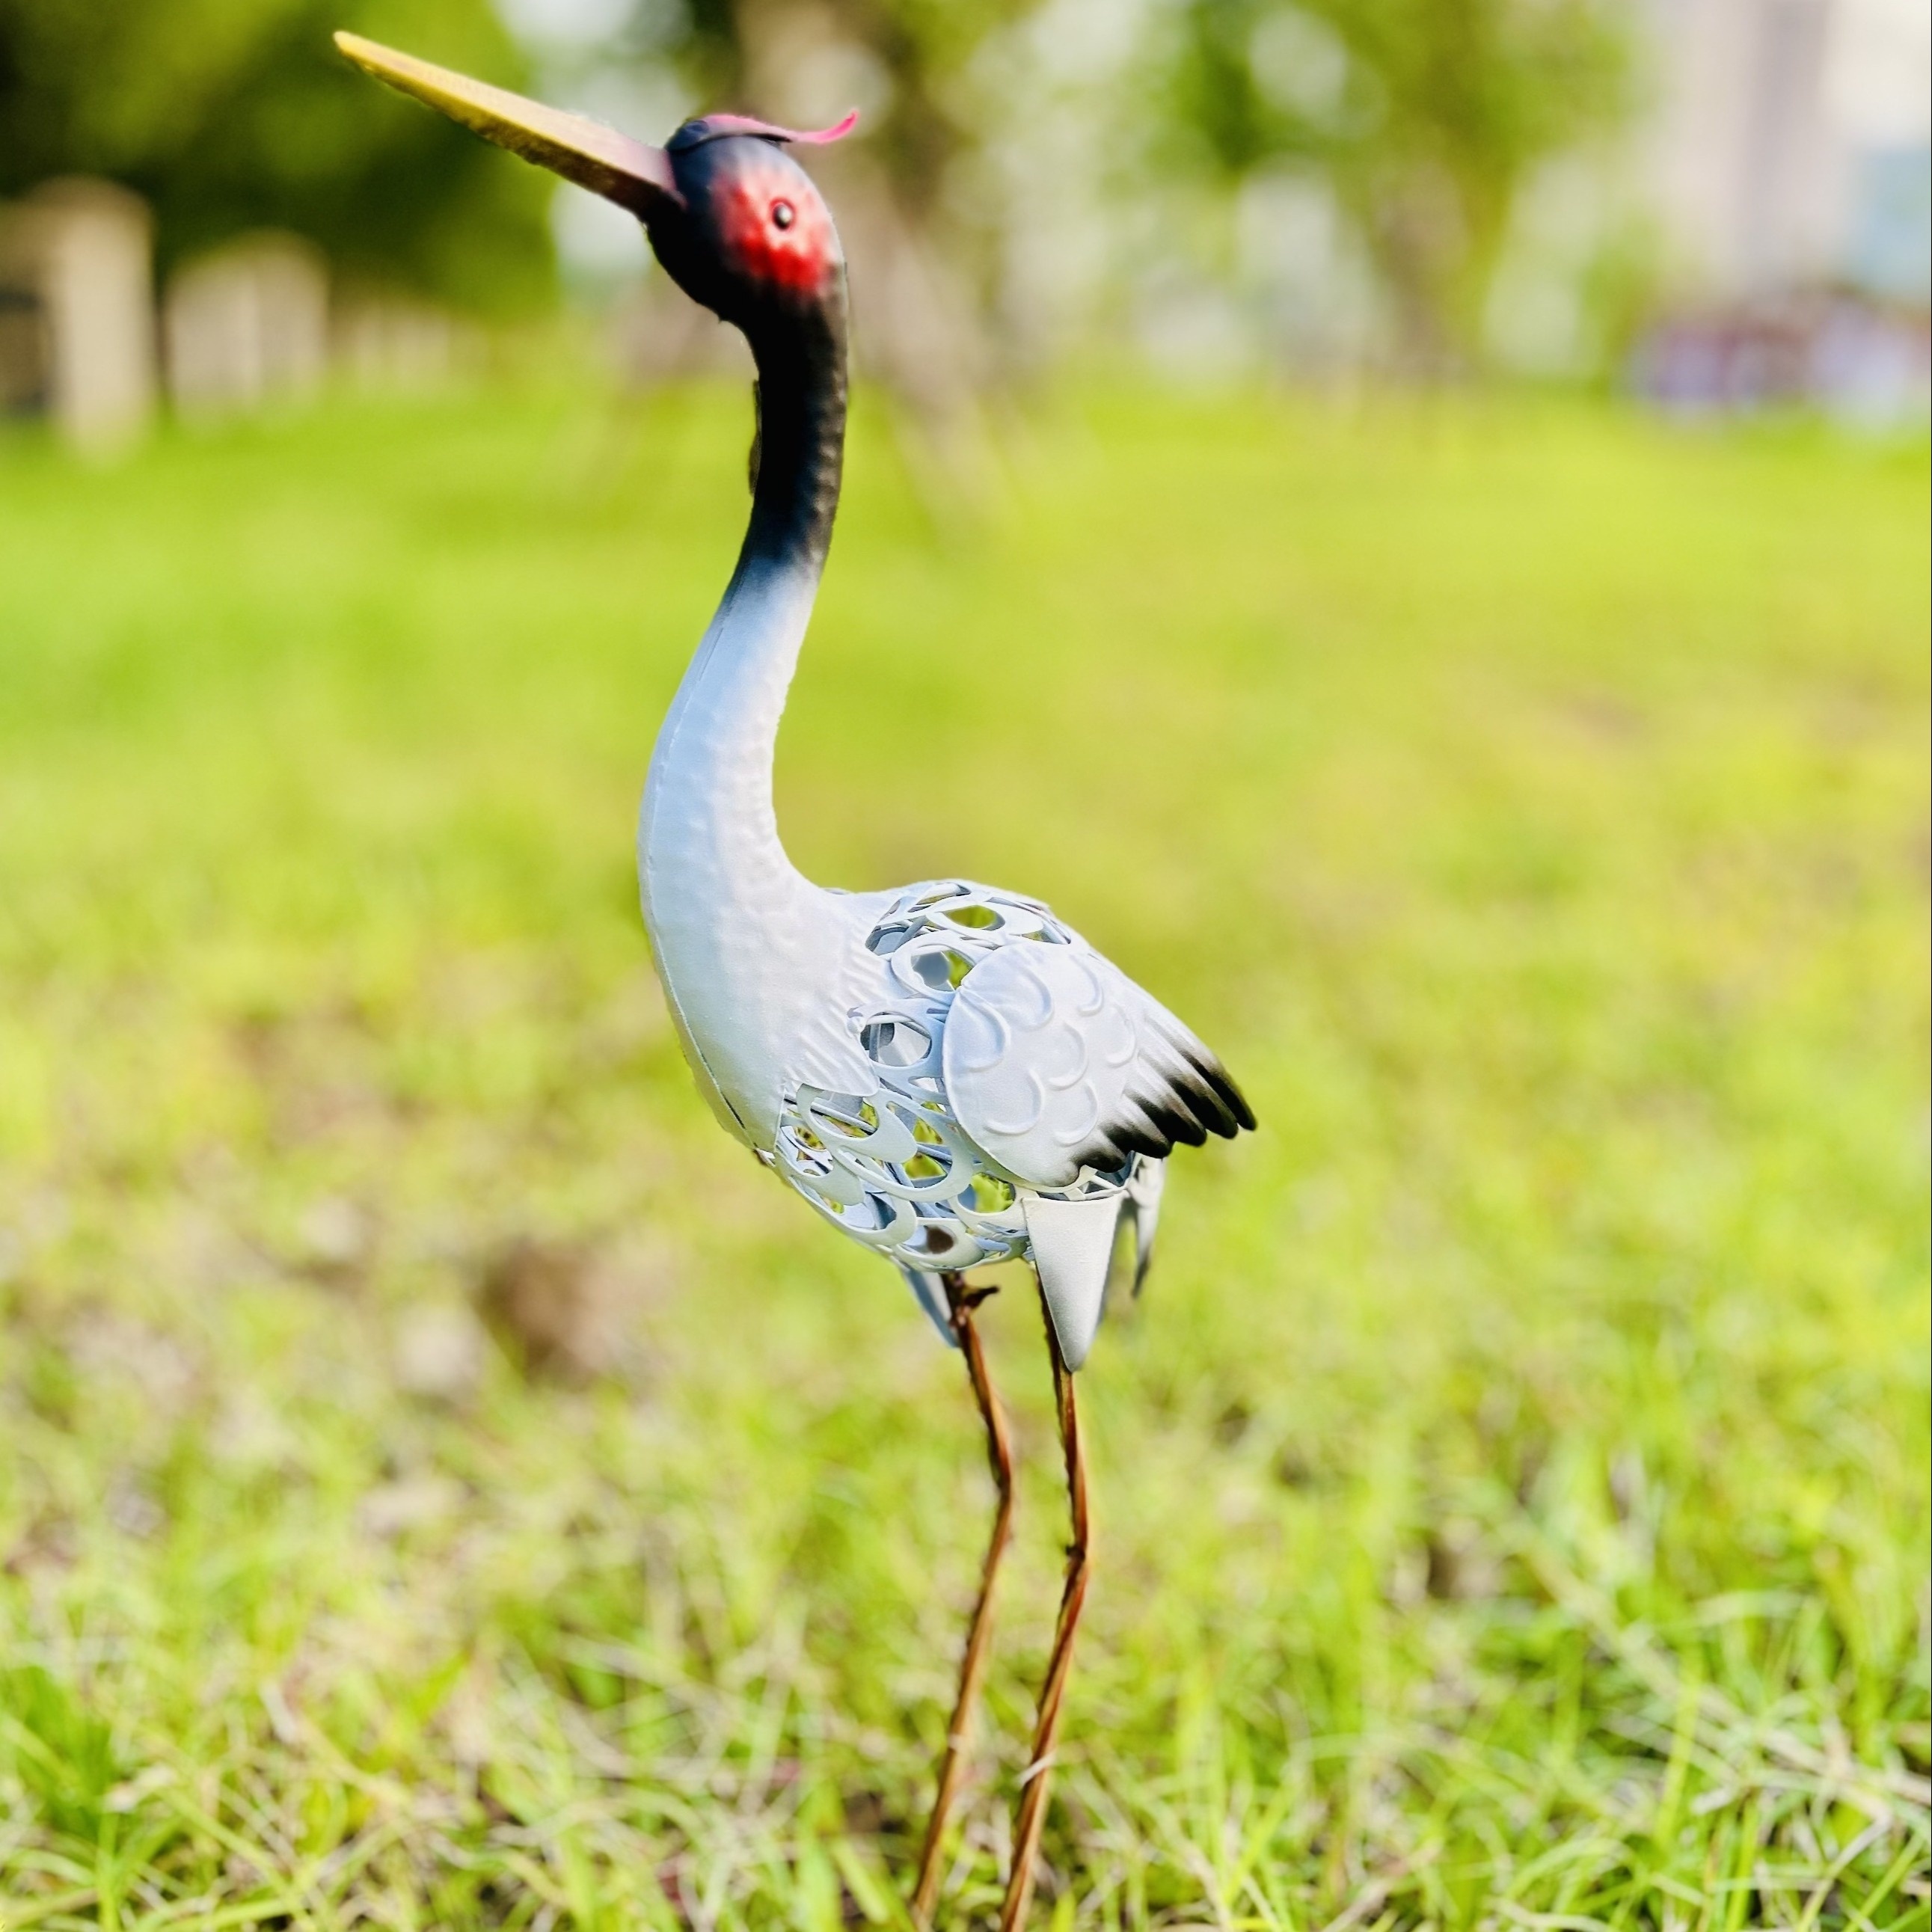 

Elegant Metal White Crane Garden Stake - Decorative Art, Perfect For Valentine's Day, Outdoor Animal Sculpture, No Battery Required